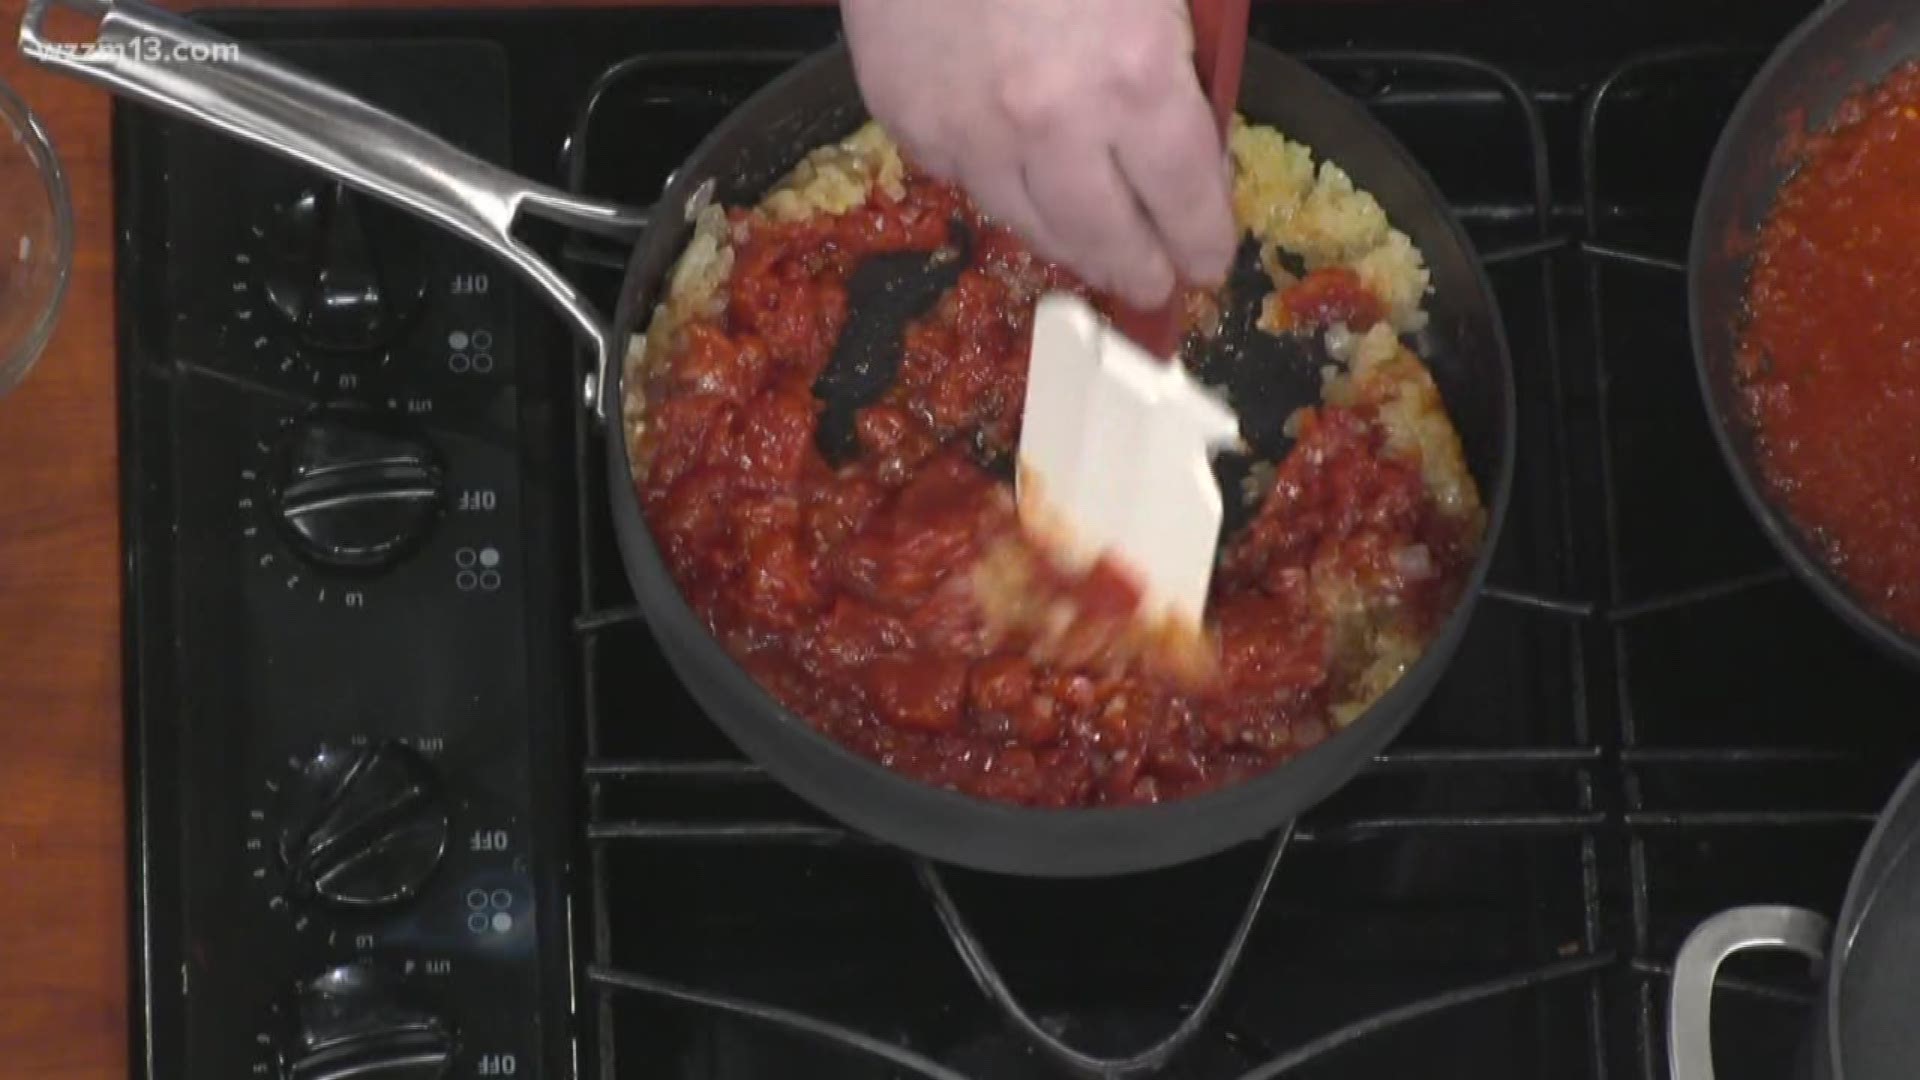 Tips and tricks on how to spice up your pasta dishes.